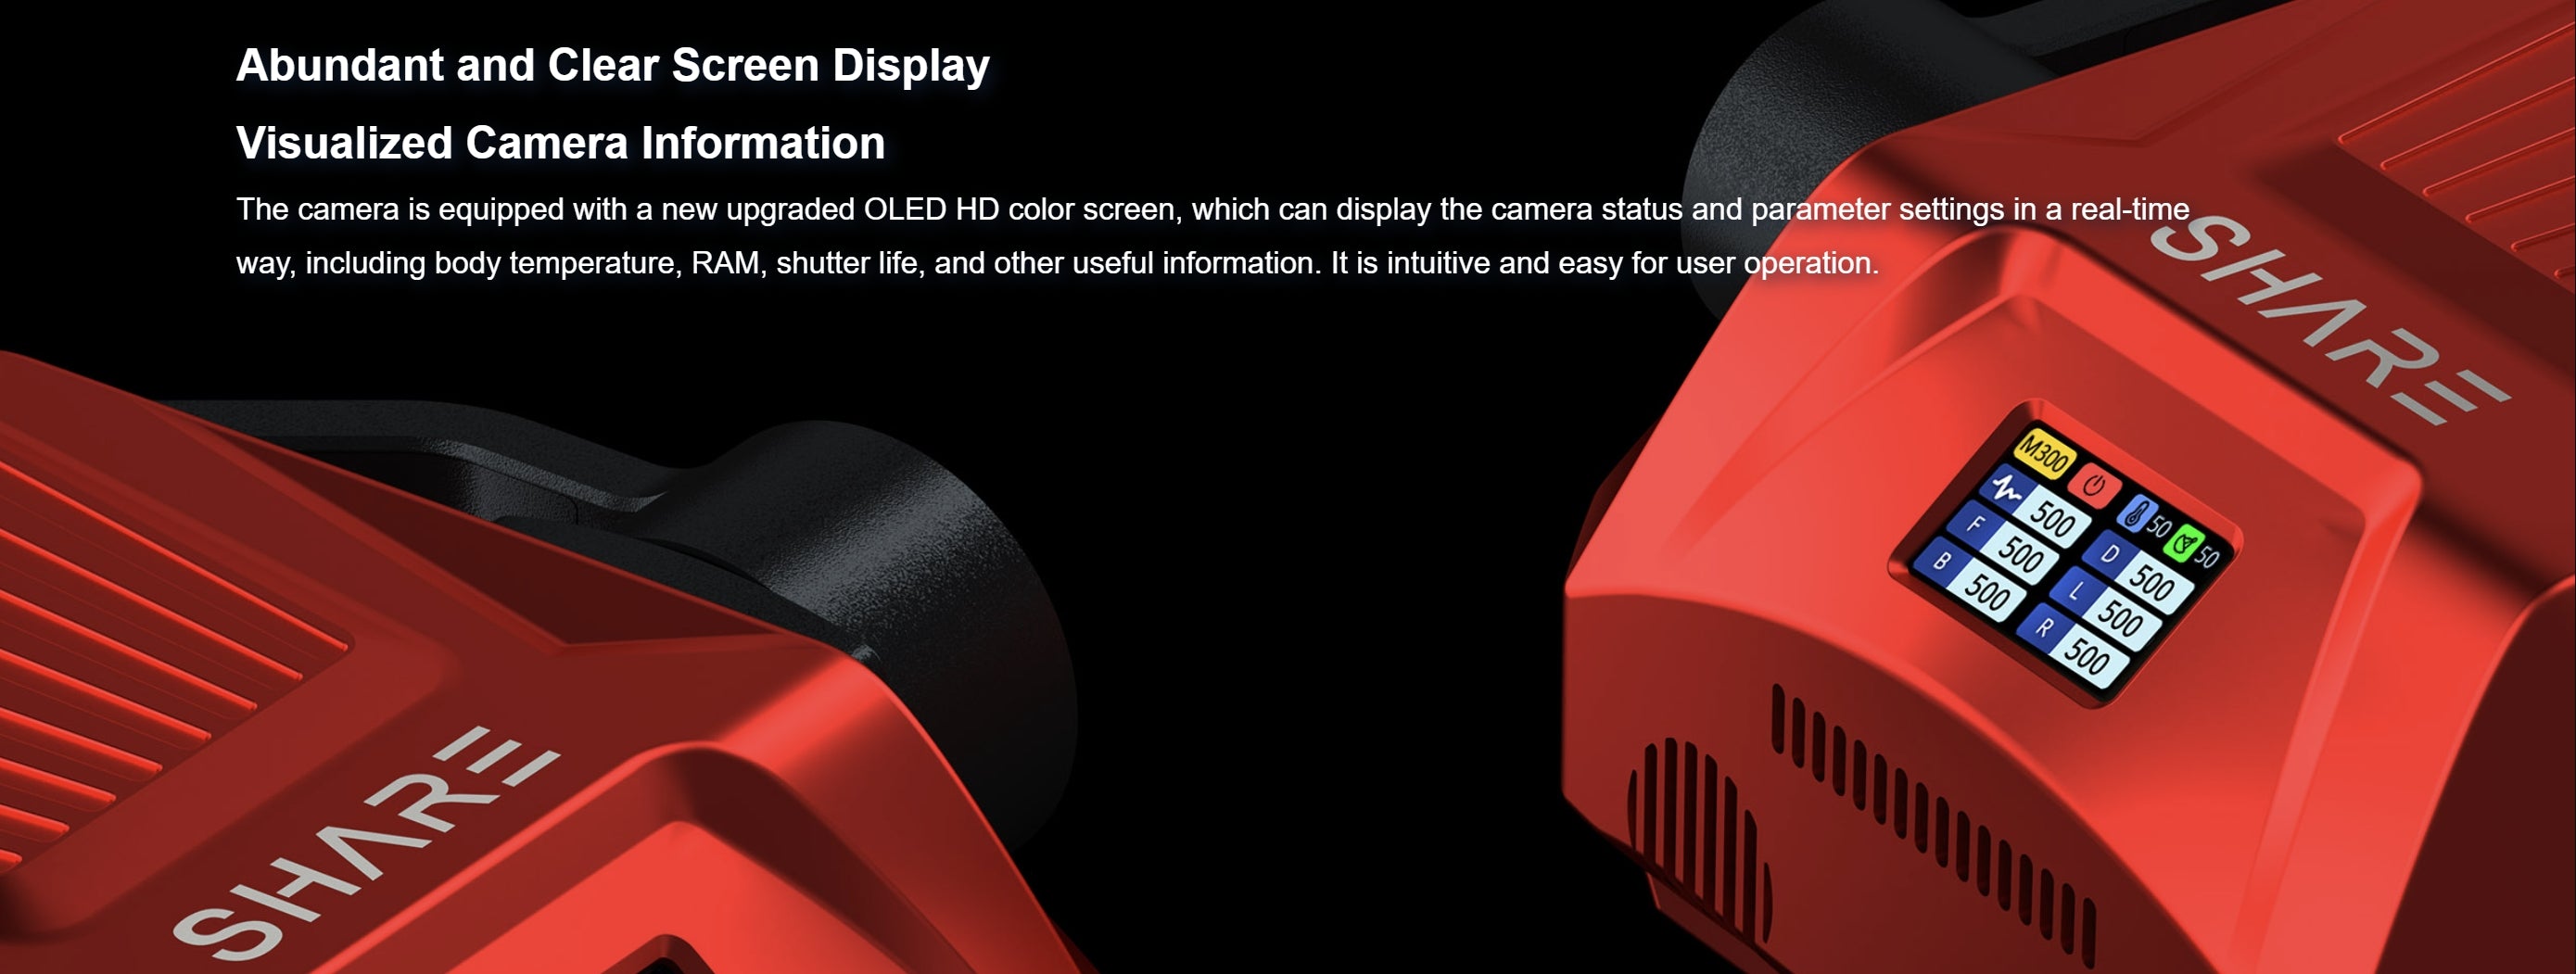 SHARE PSDK 102S V3, Real-time camera status and settings on OLED HD color screen.